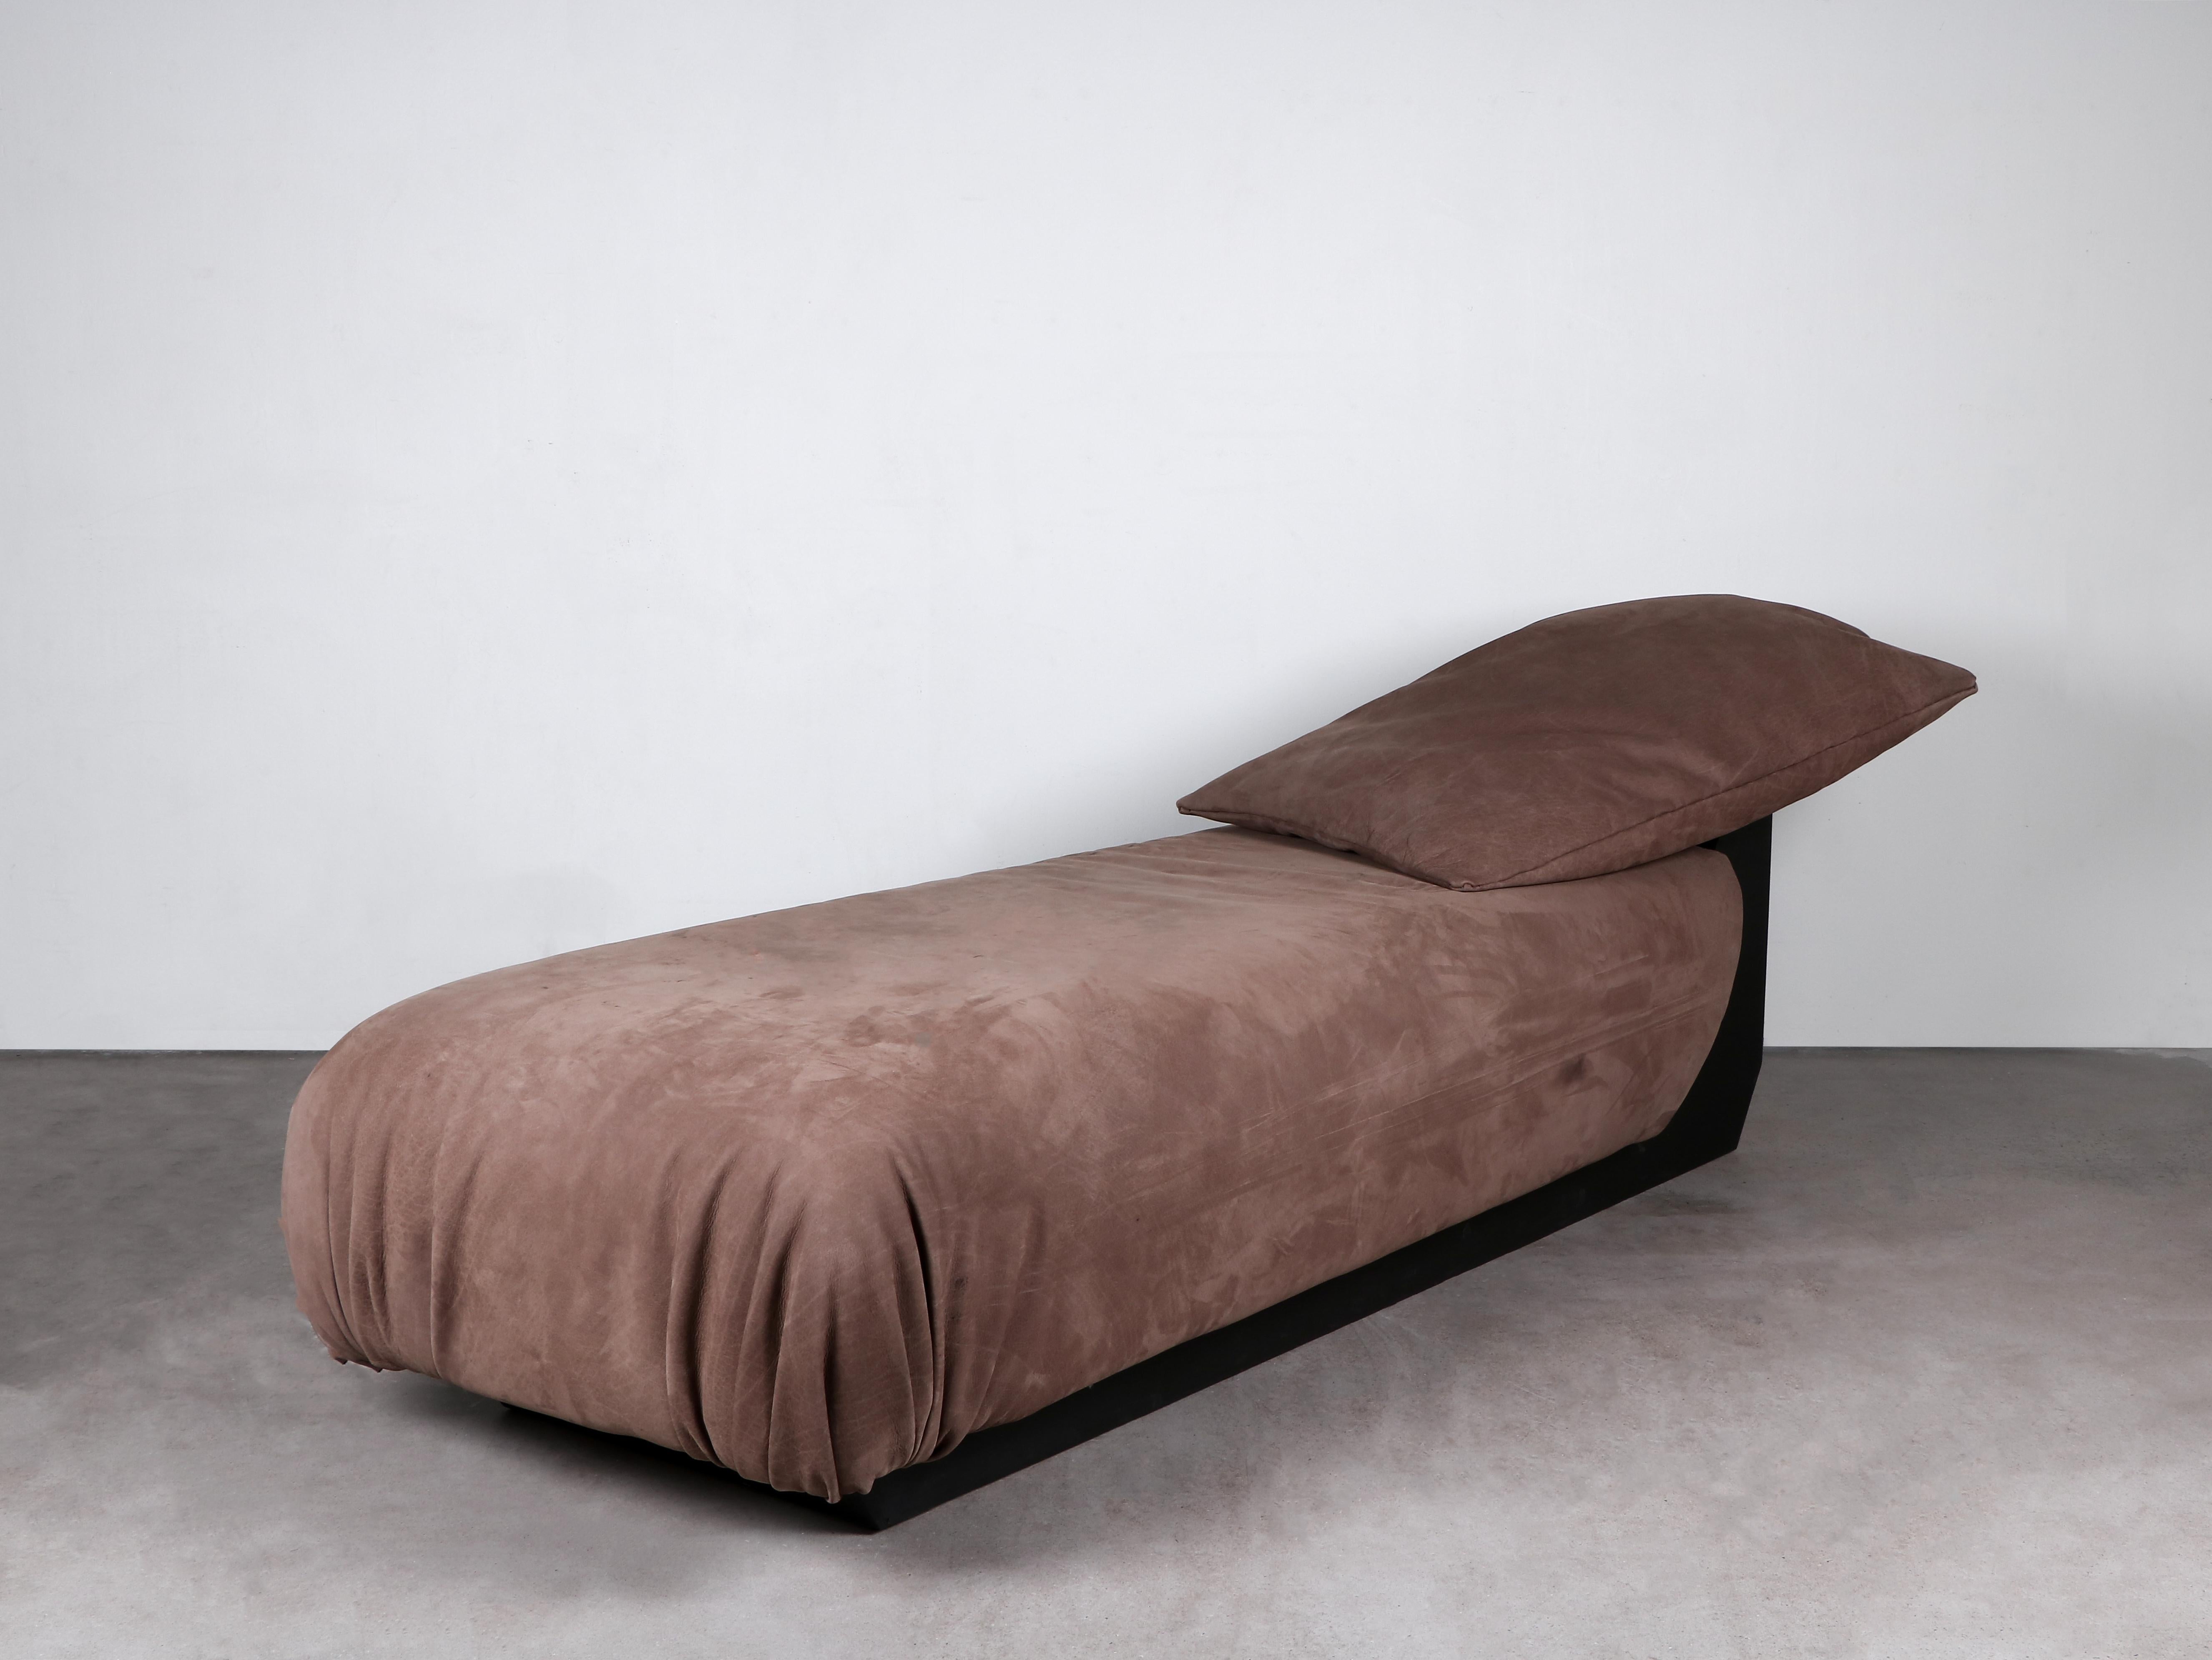 Brutal Daybed by Lucas Tyra Morten
Limited Edition of 12 + 1 AP
Signed
Dimensions: W180 x D40 H60 cm
Material: Hand waxed plywood and leather

Objects comes with a 